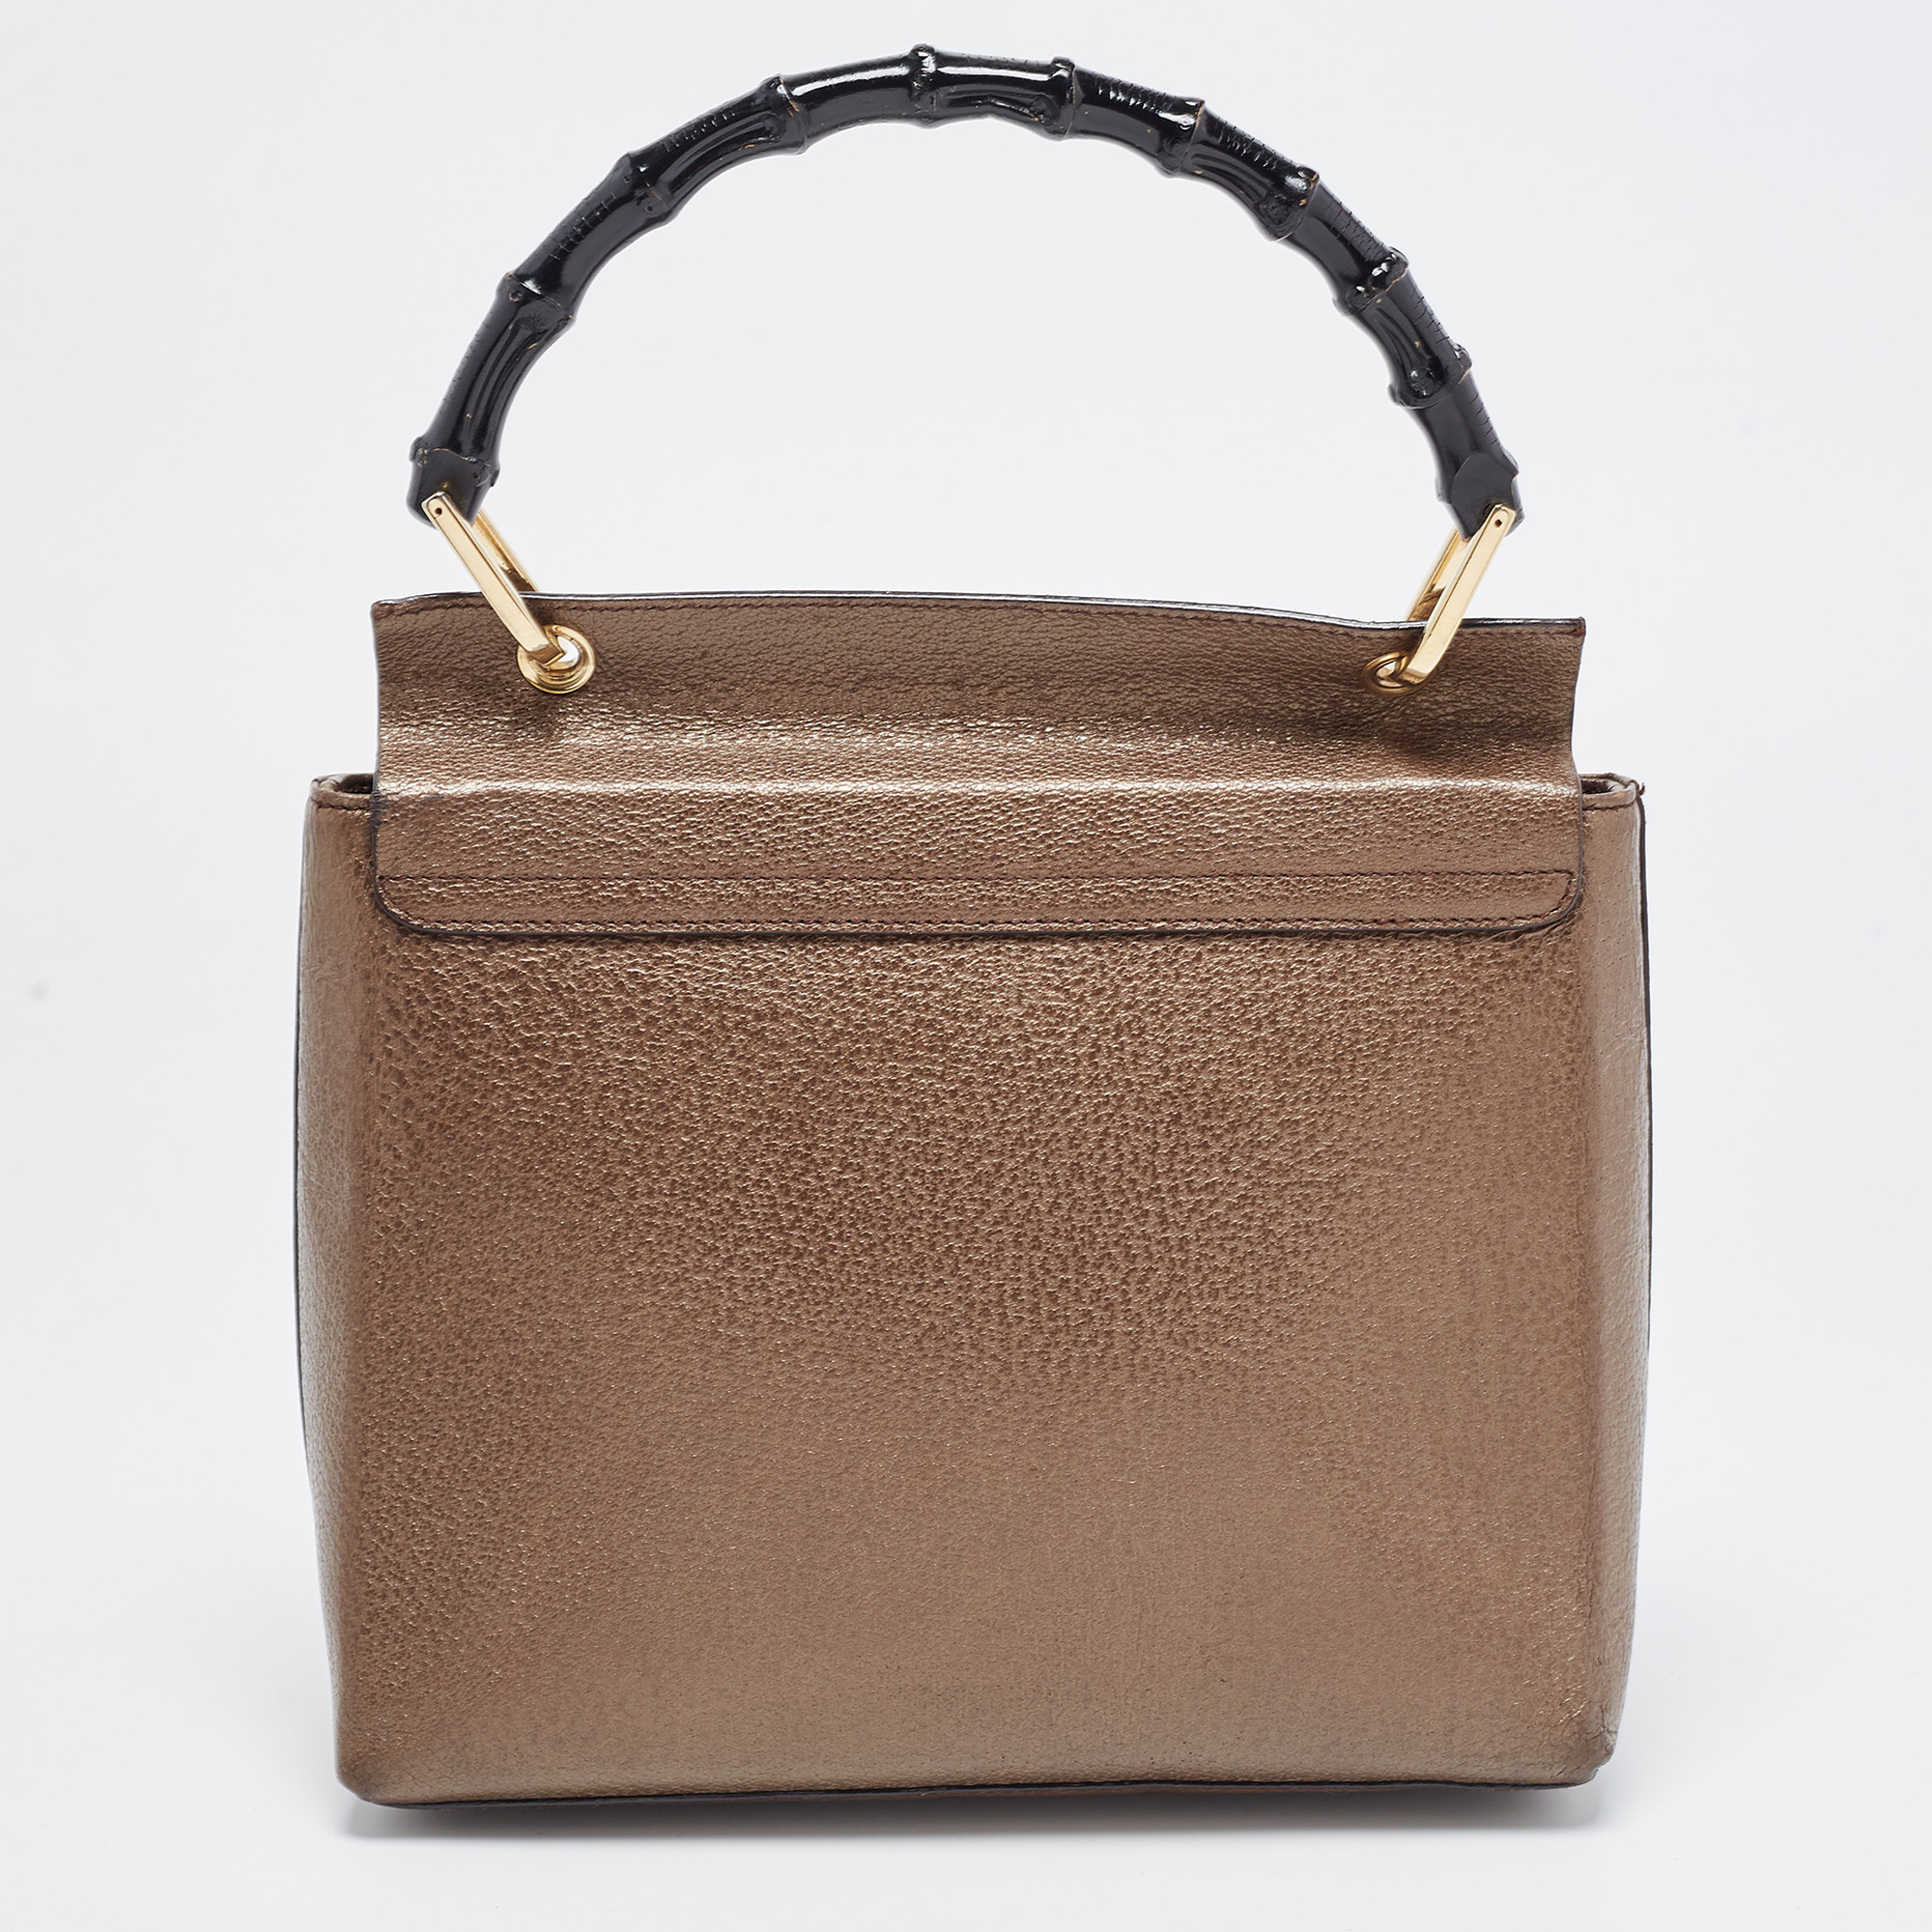 Gucci Bronze Leather Bamboo Flap Top Handle Bag